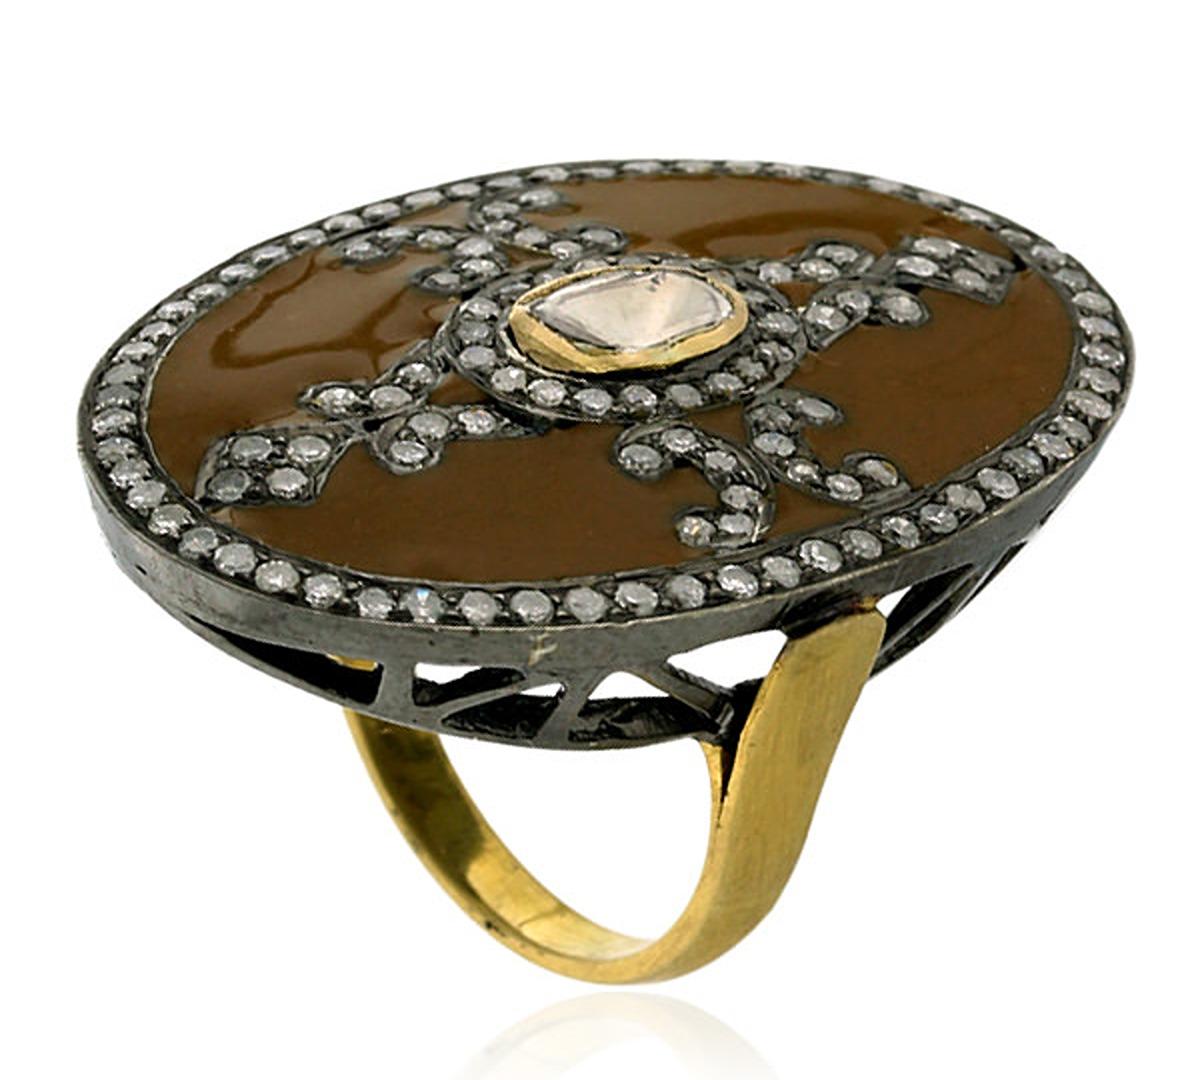 Mixed Cut Pave Diamond Enamel Ring Made In 18k Gold & Silver For Sale